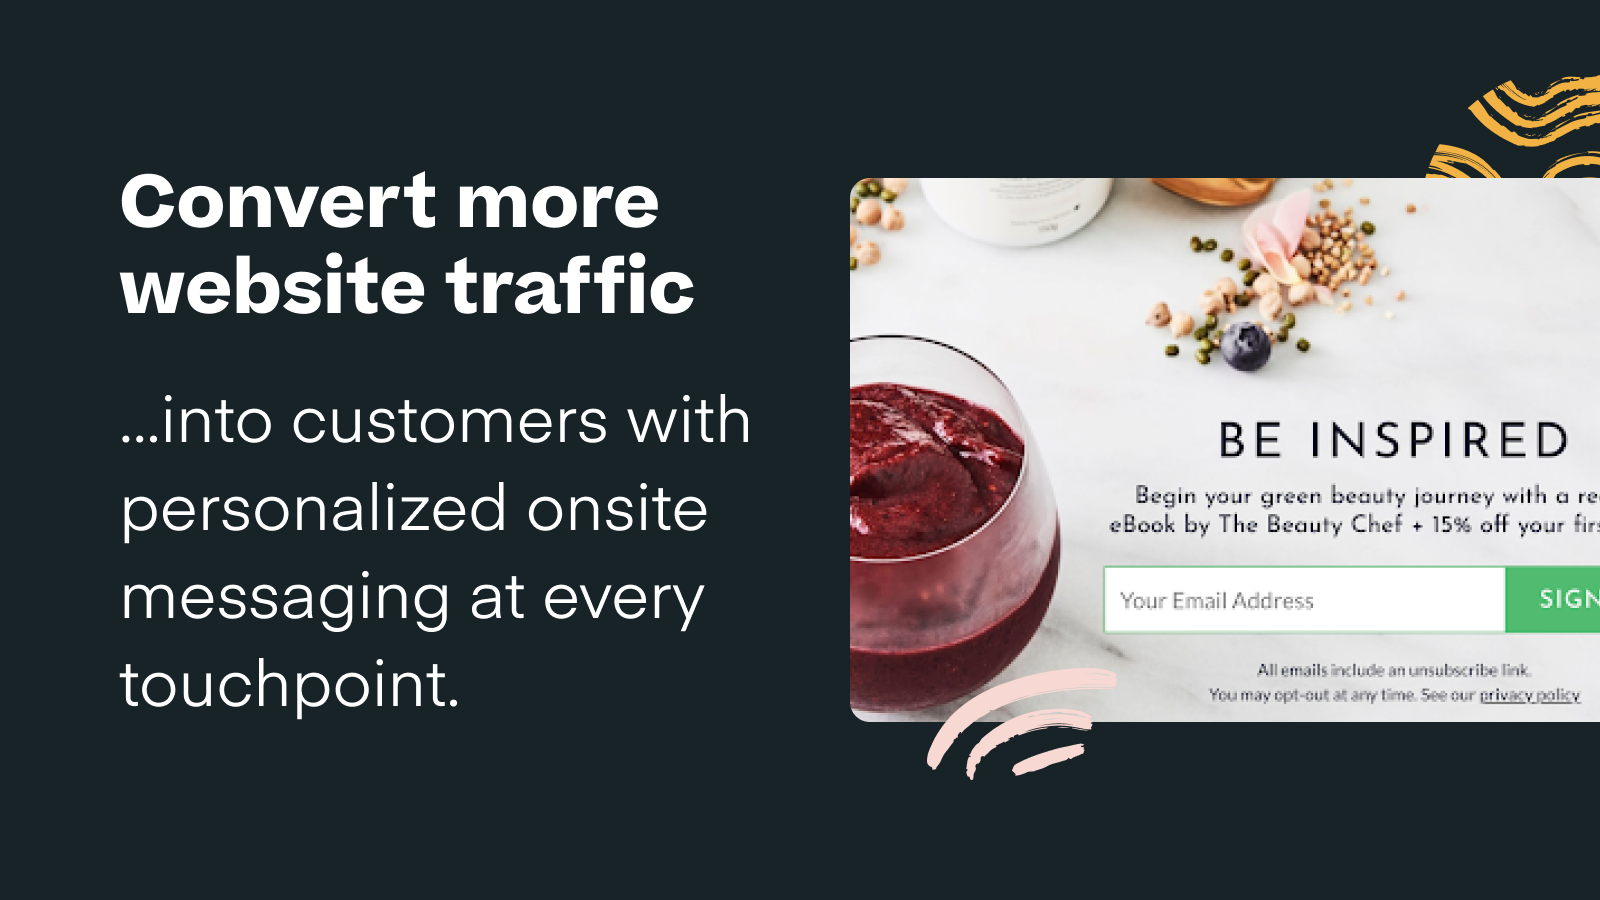 Convert more website traffic into customers